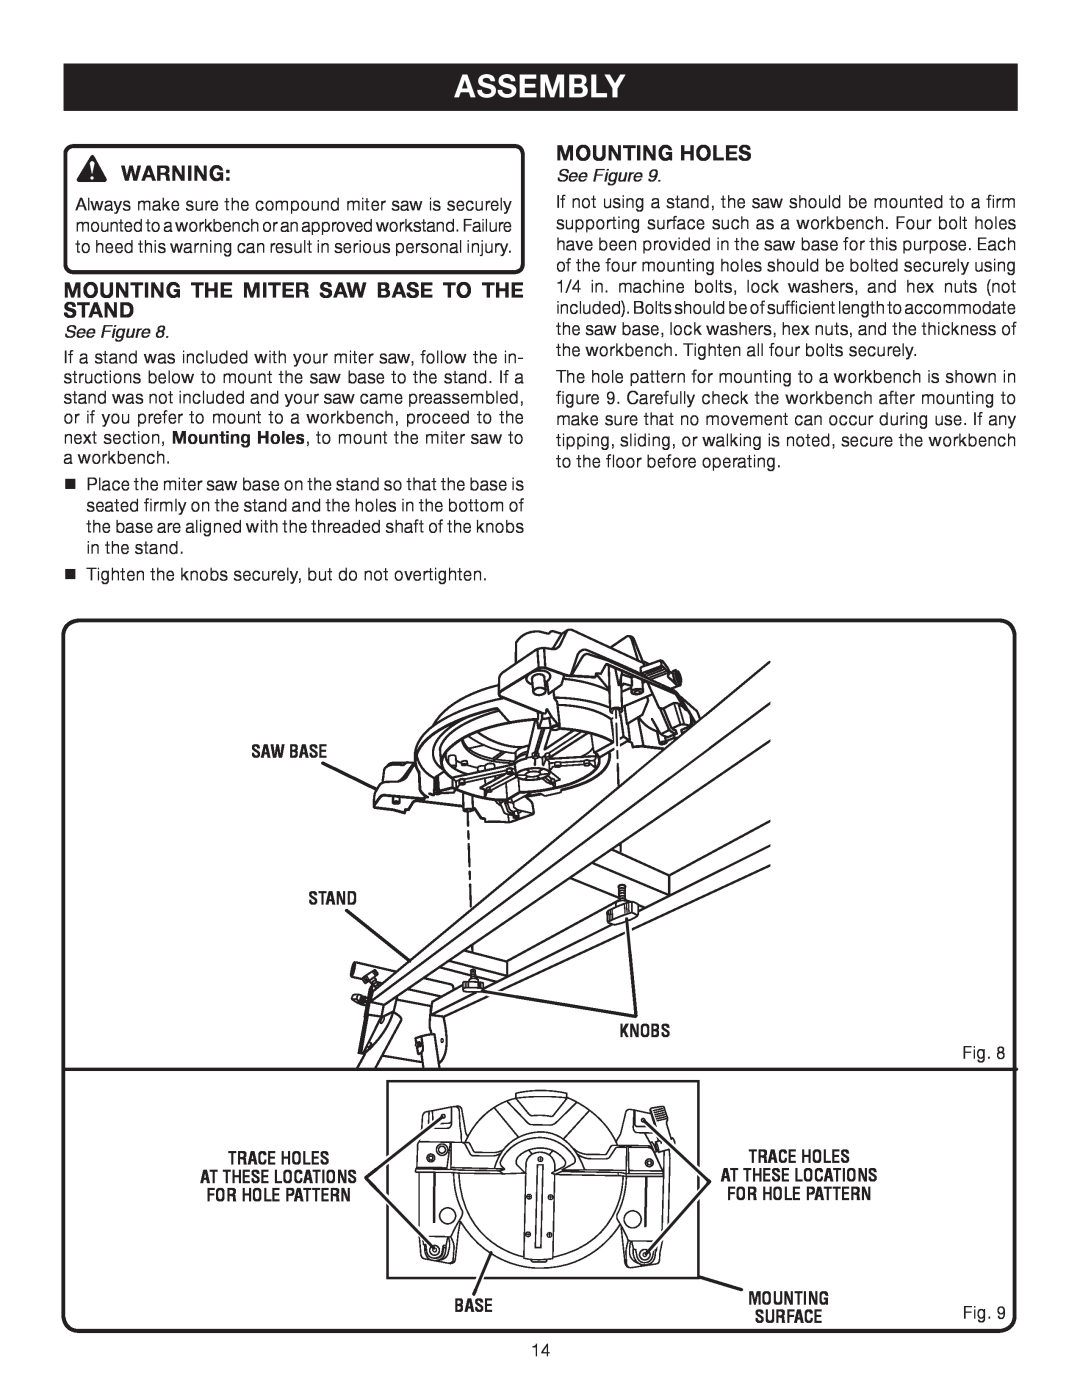 Ryobi TS1141 manual Assembly, Mounting the miter saw base to the stand, Mounting Holes, See Figure 